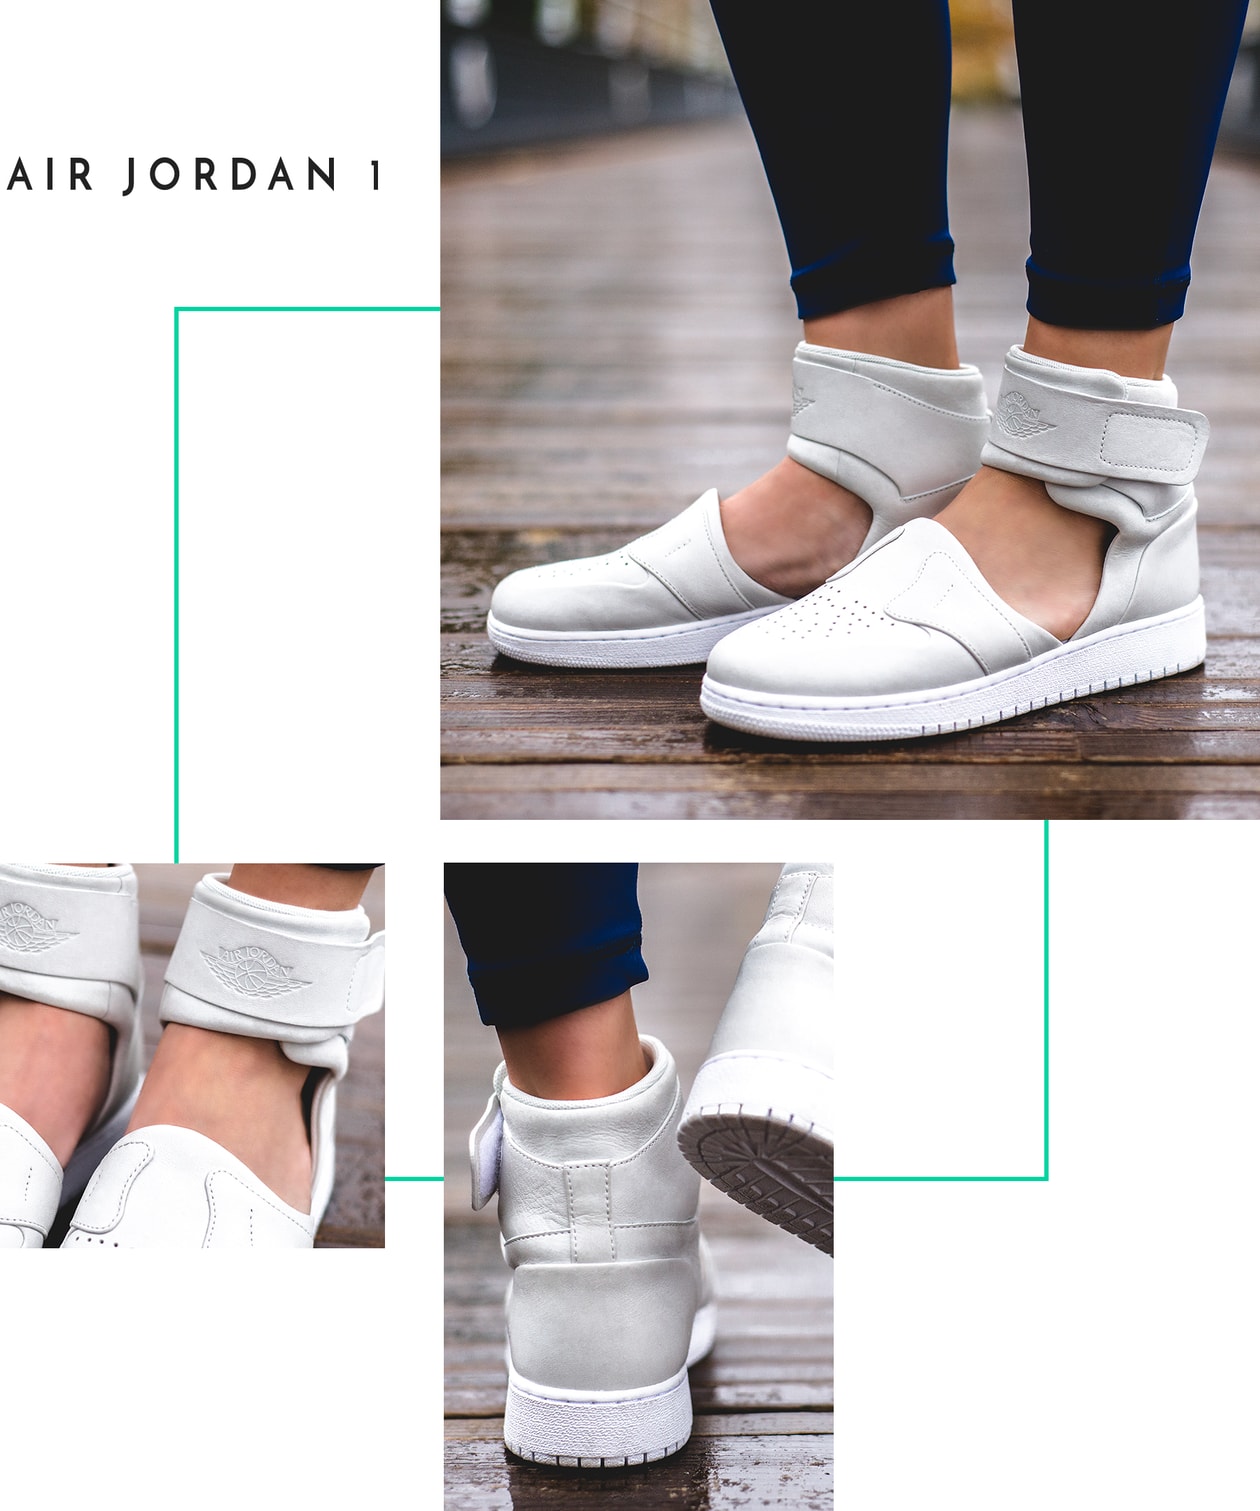 Nike The 1 Reimagined Lover XX Air Force 1 Jordan Jumpman Women Female Design Collective Release Date Where to Buy Closer On Feet Look White Mule Sandal Strap